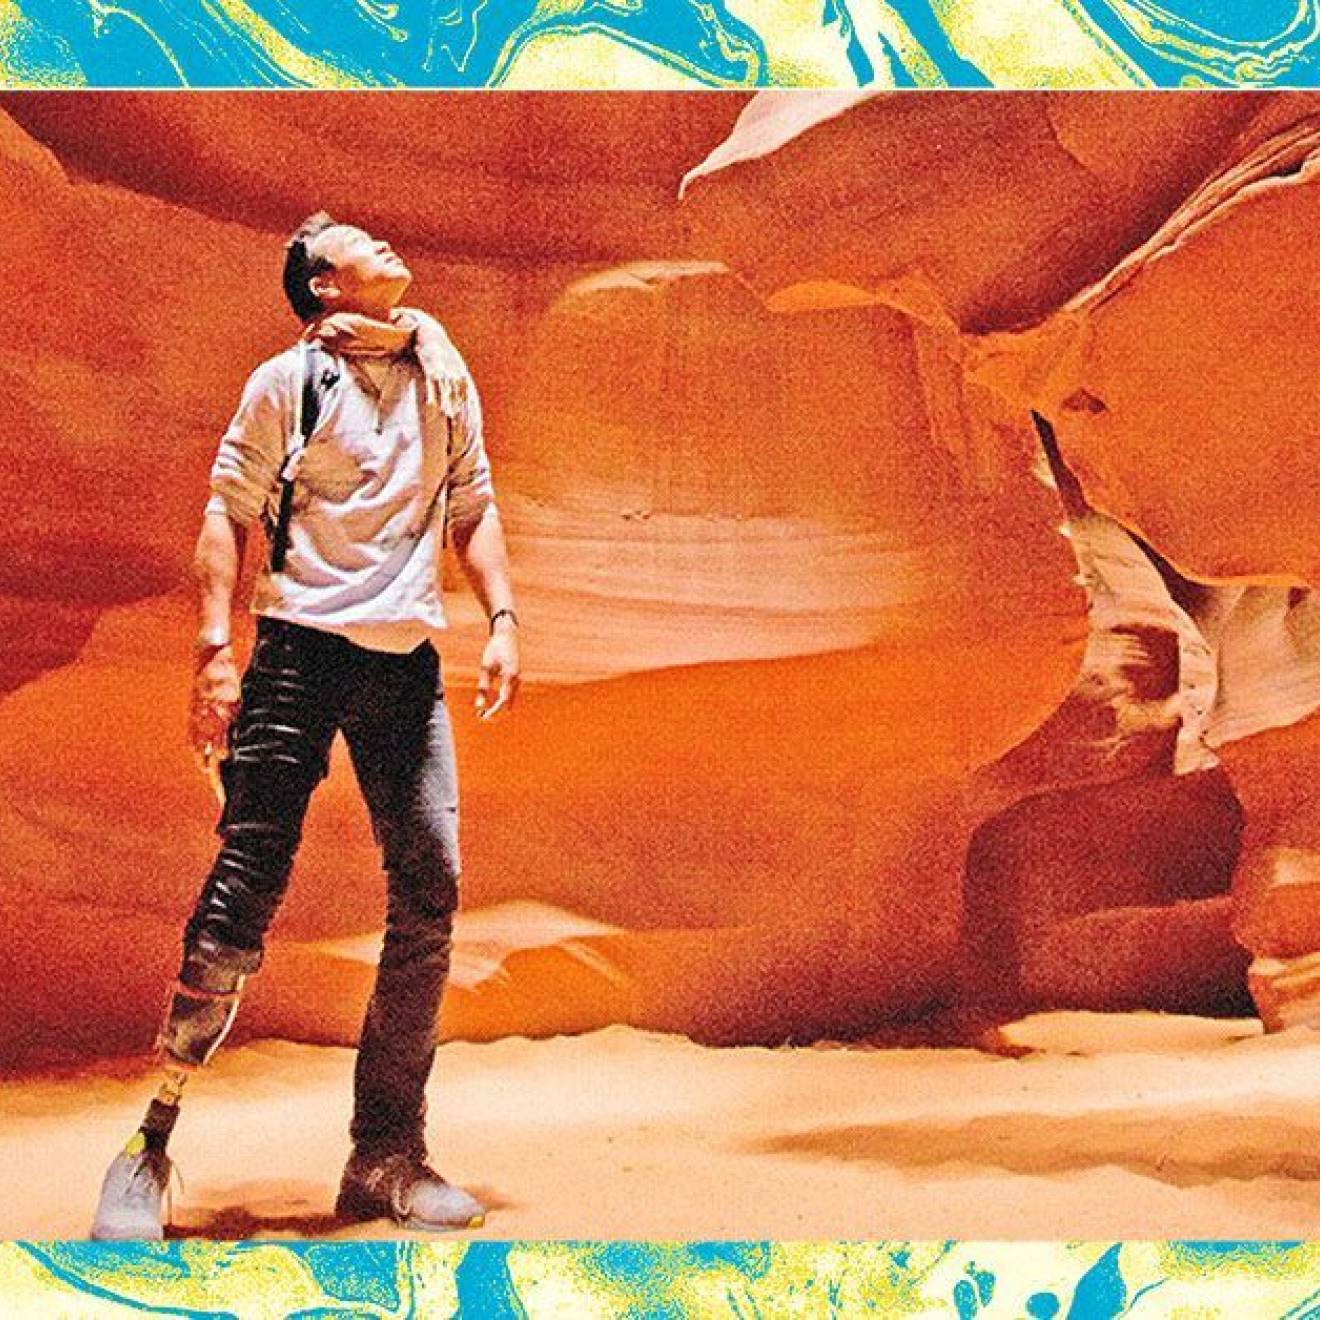 A male hiker with a prosthetic leg below his knee looks up against the backdrop of a red rock canyon wall. The photo is edited and filtered to look grainy, and surrounded by a teal/green textured frame.